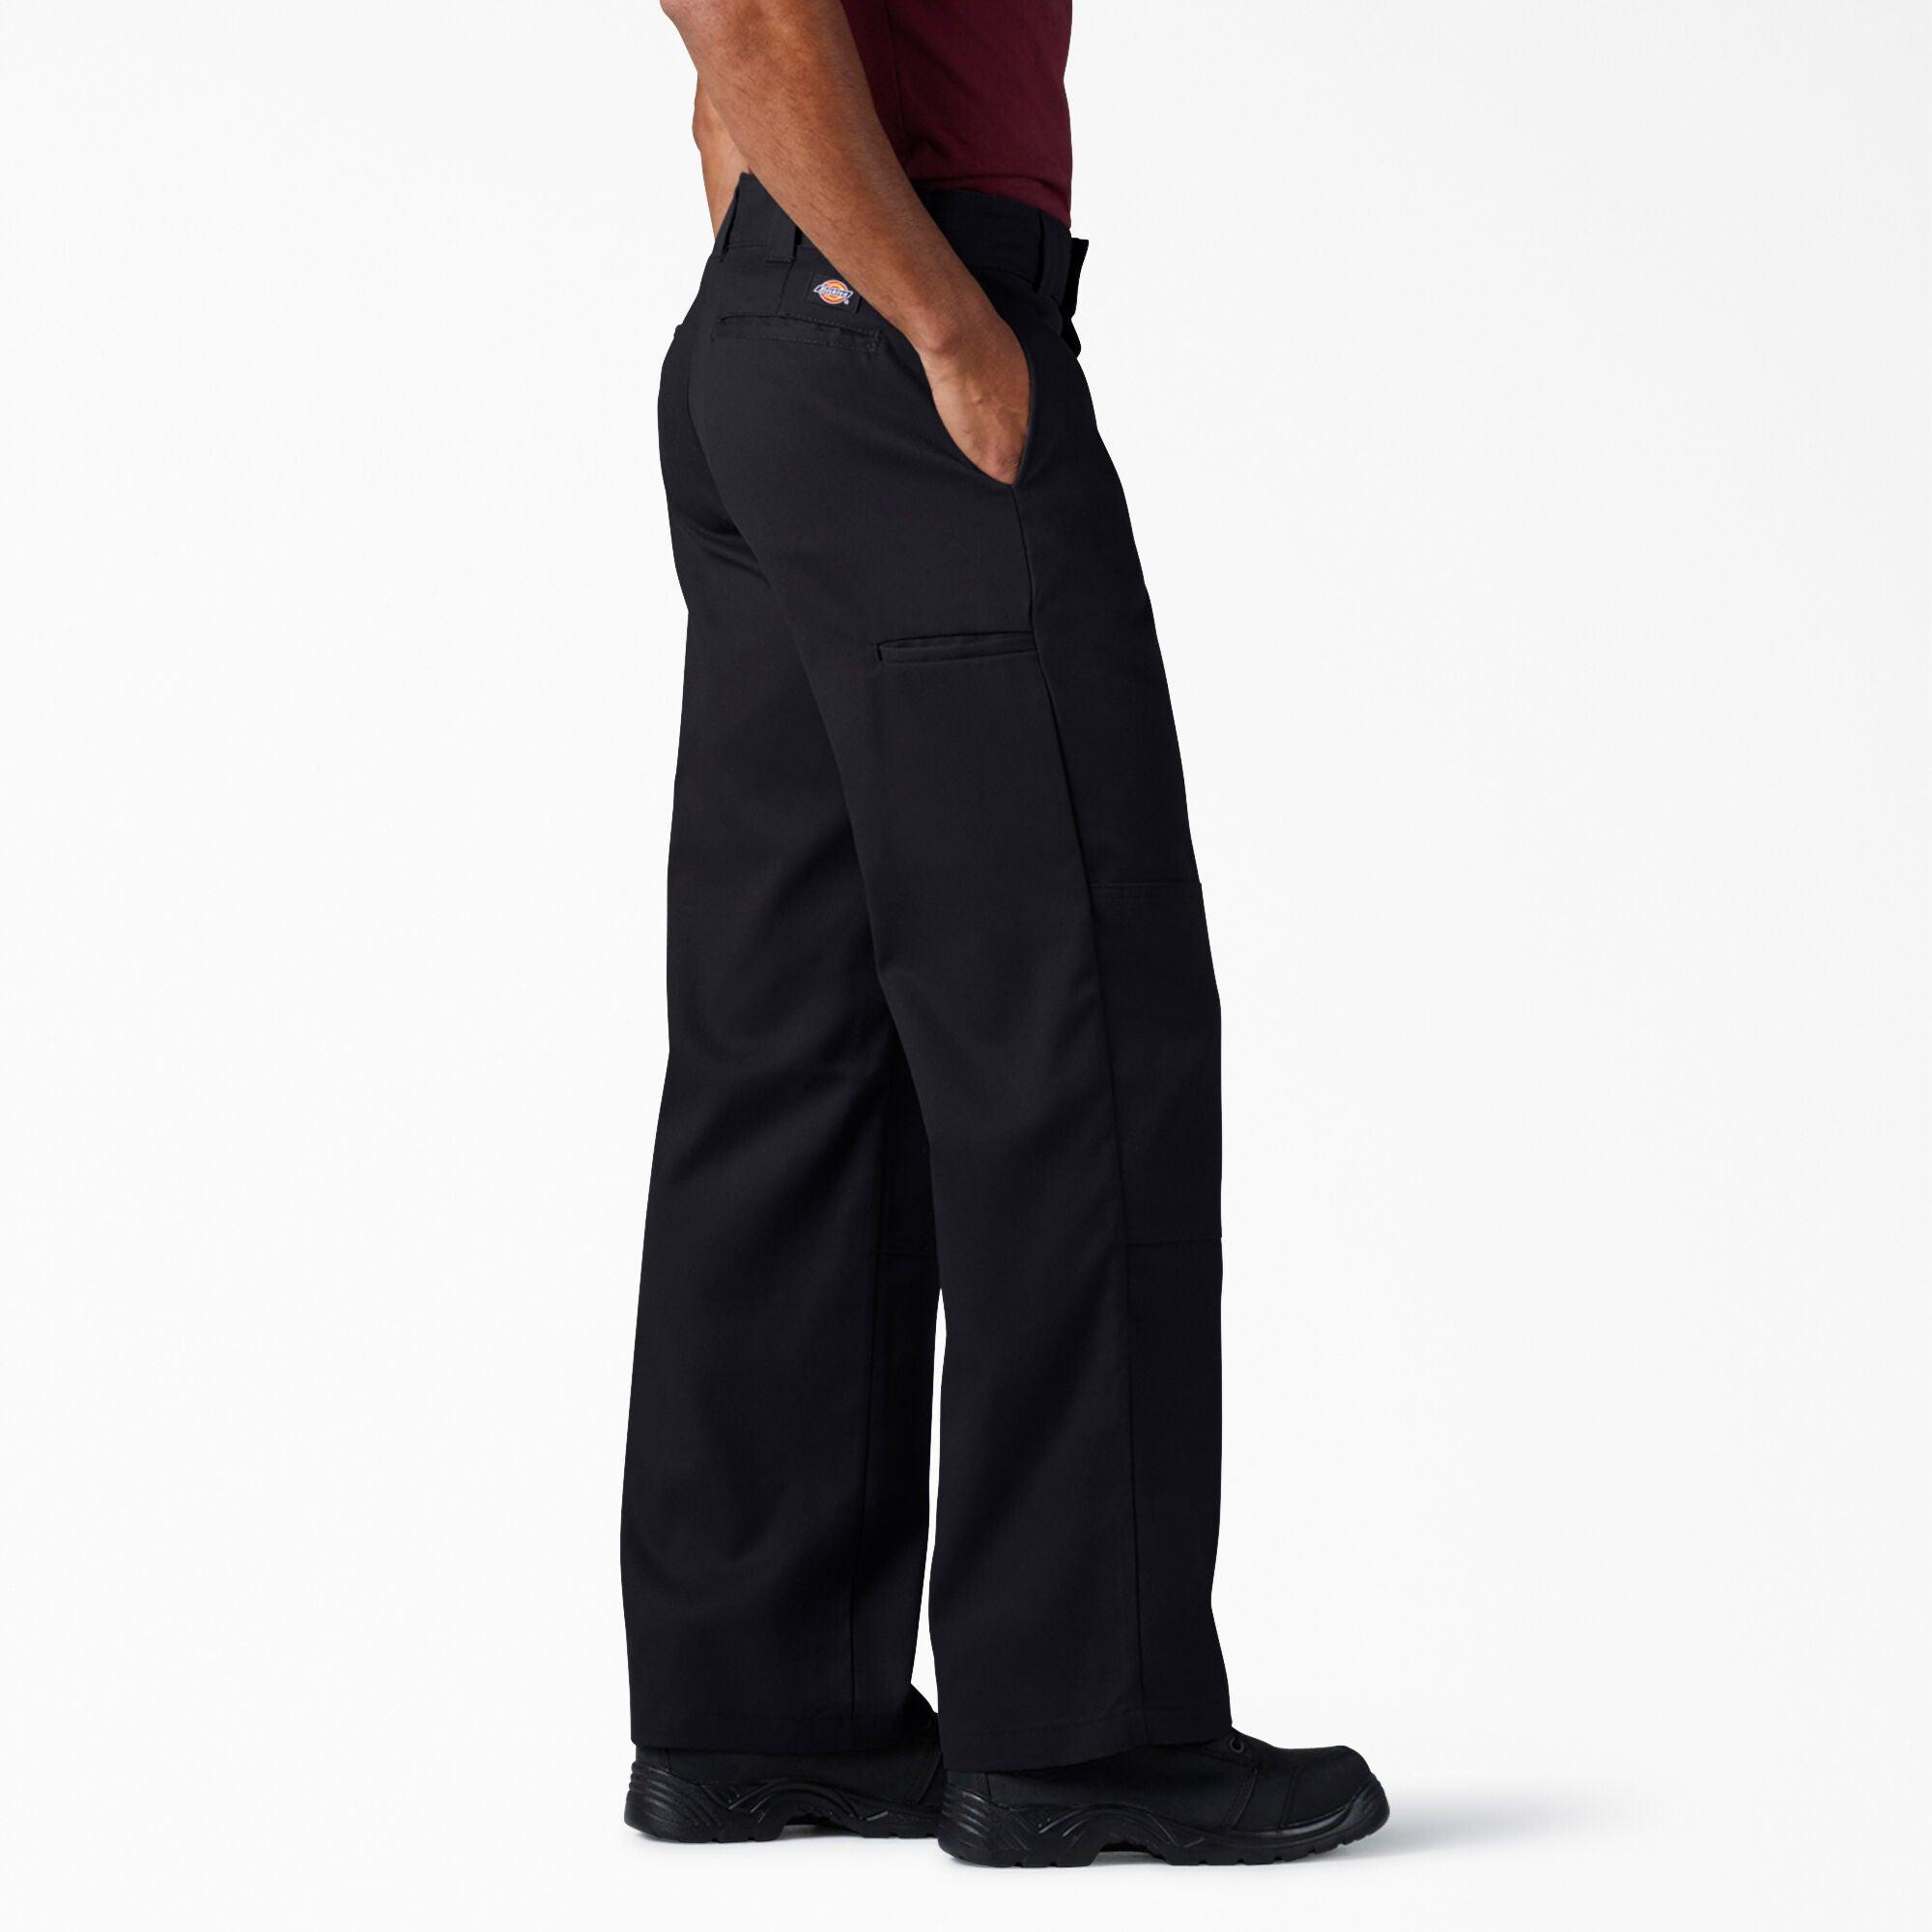 FLEX Loose Fit Double Knee Work Pants, Black - Purpose-Built / Home of the Trades